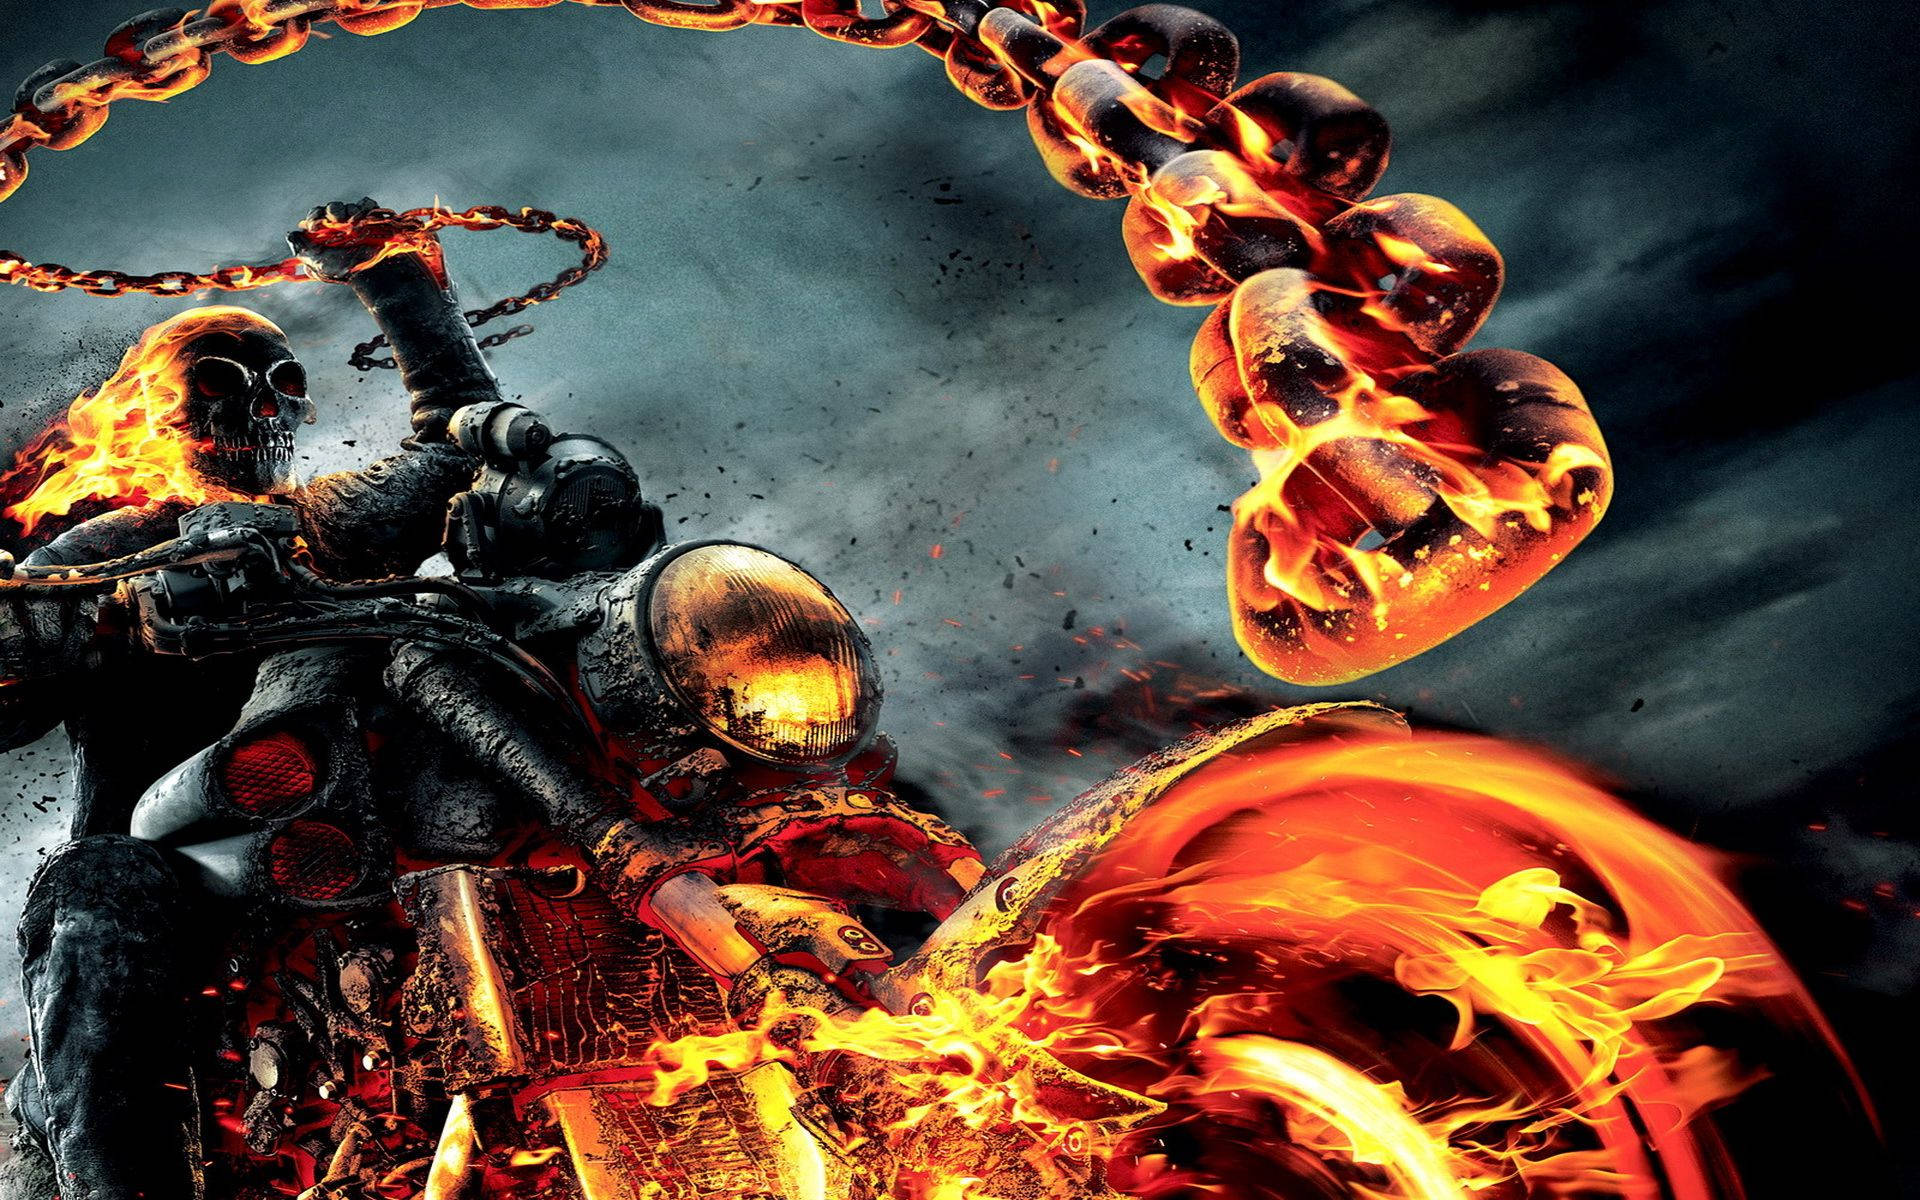 Cool 3d Ghost Rider With Infernal Chain